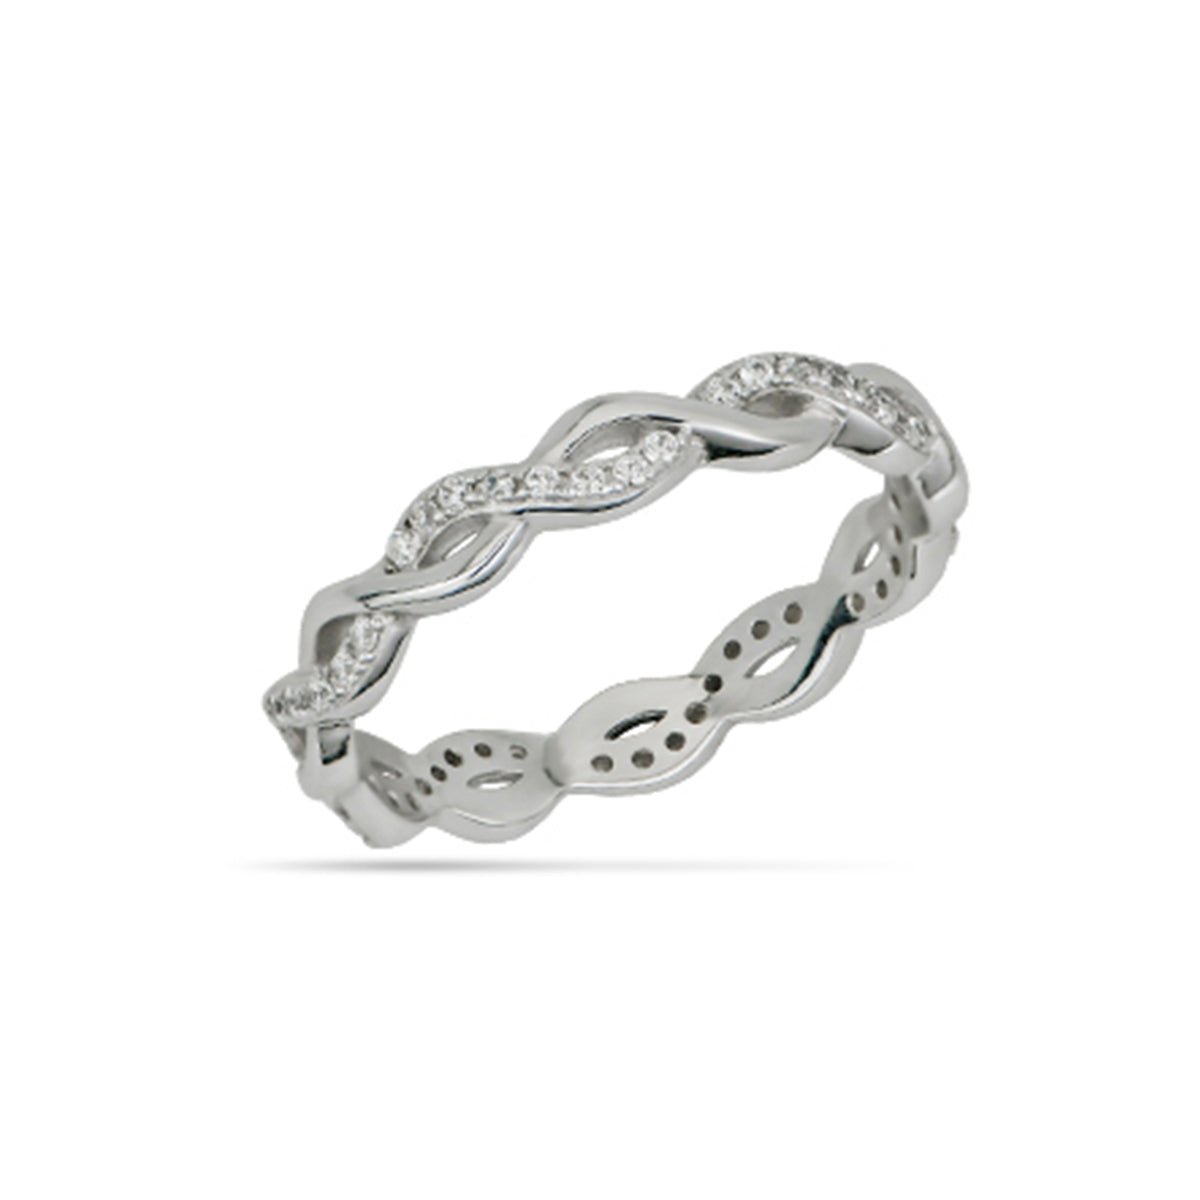 Pave Braided Ring Silver Plated